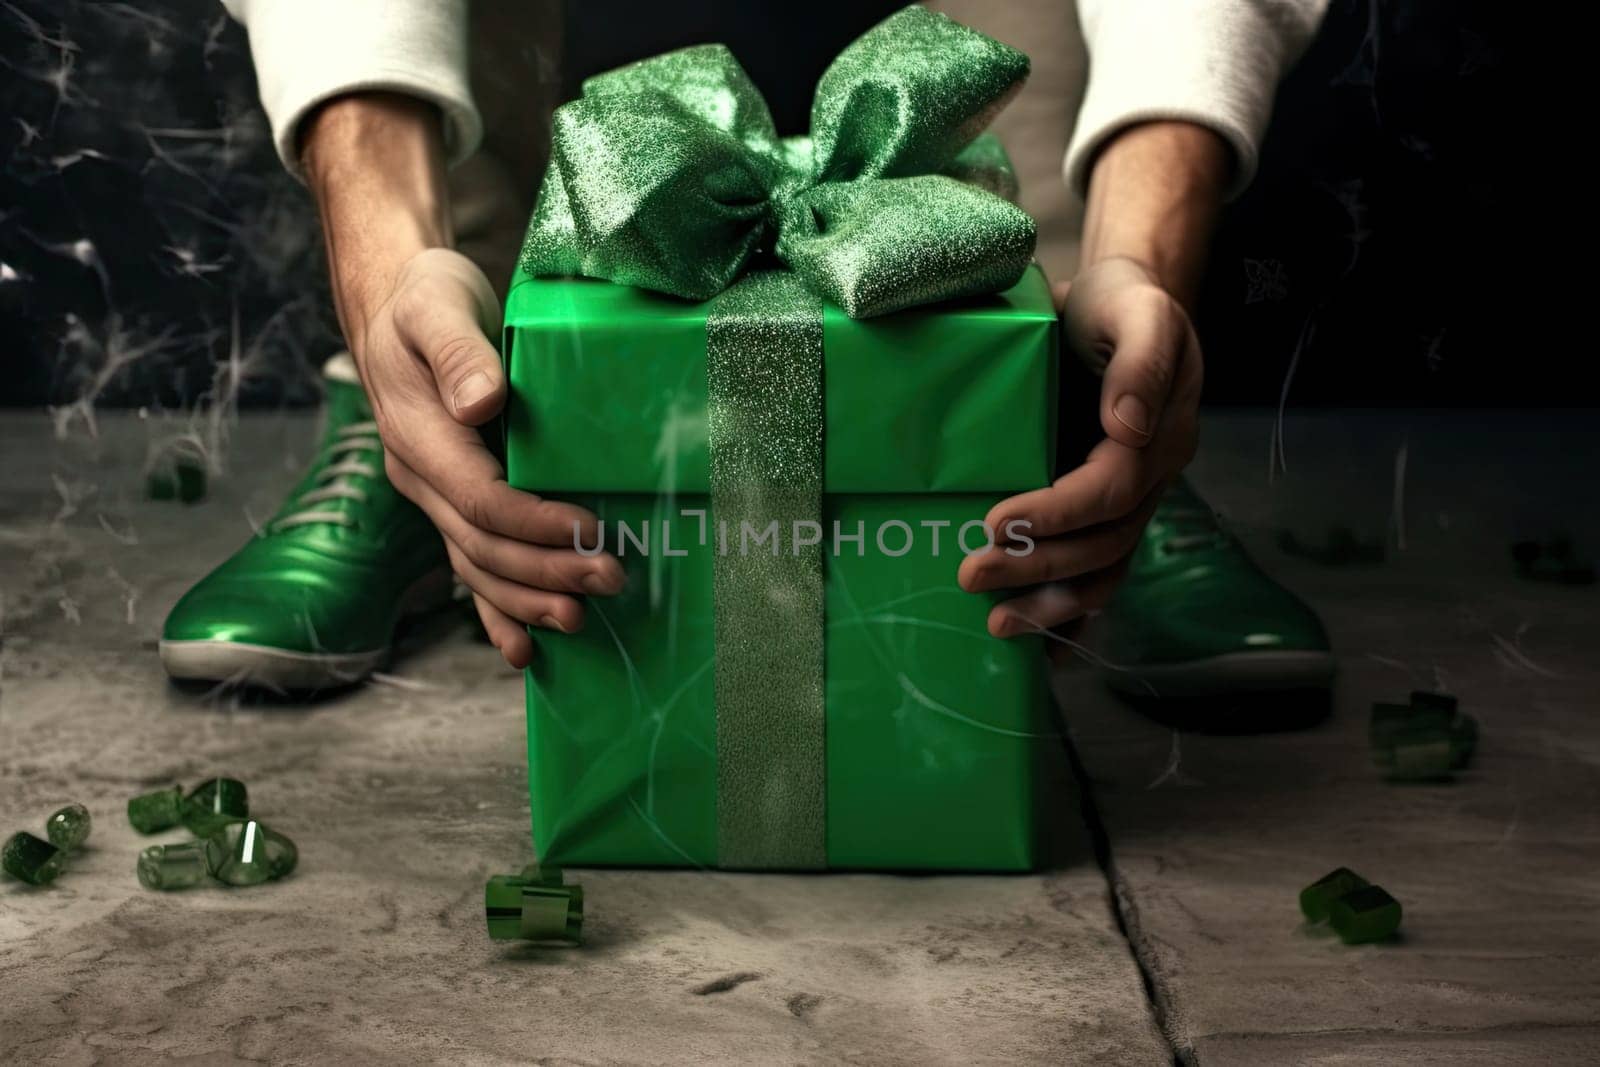 A Joyful Surprise: Man Holding Vibrant Green Present Box with Curiosity and Excitement